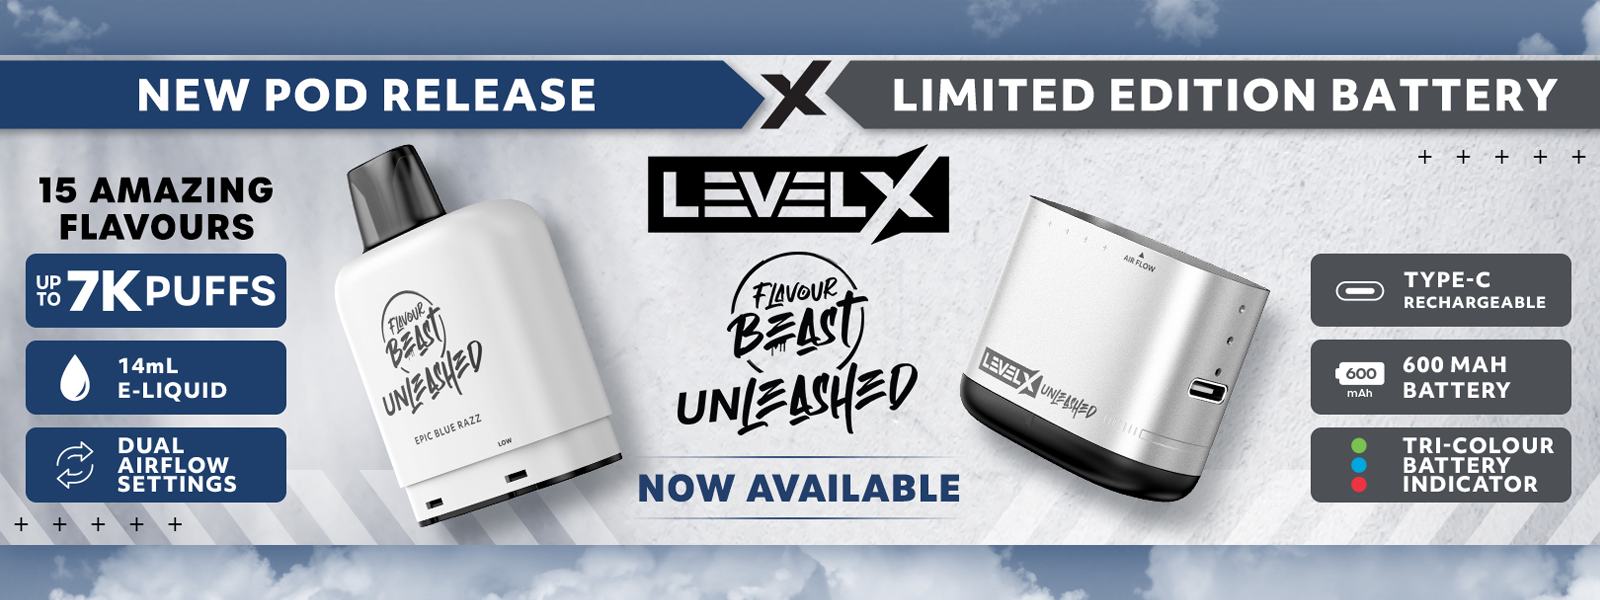 LEVEL X / FLAVOUR BEAST UNLEASHED